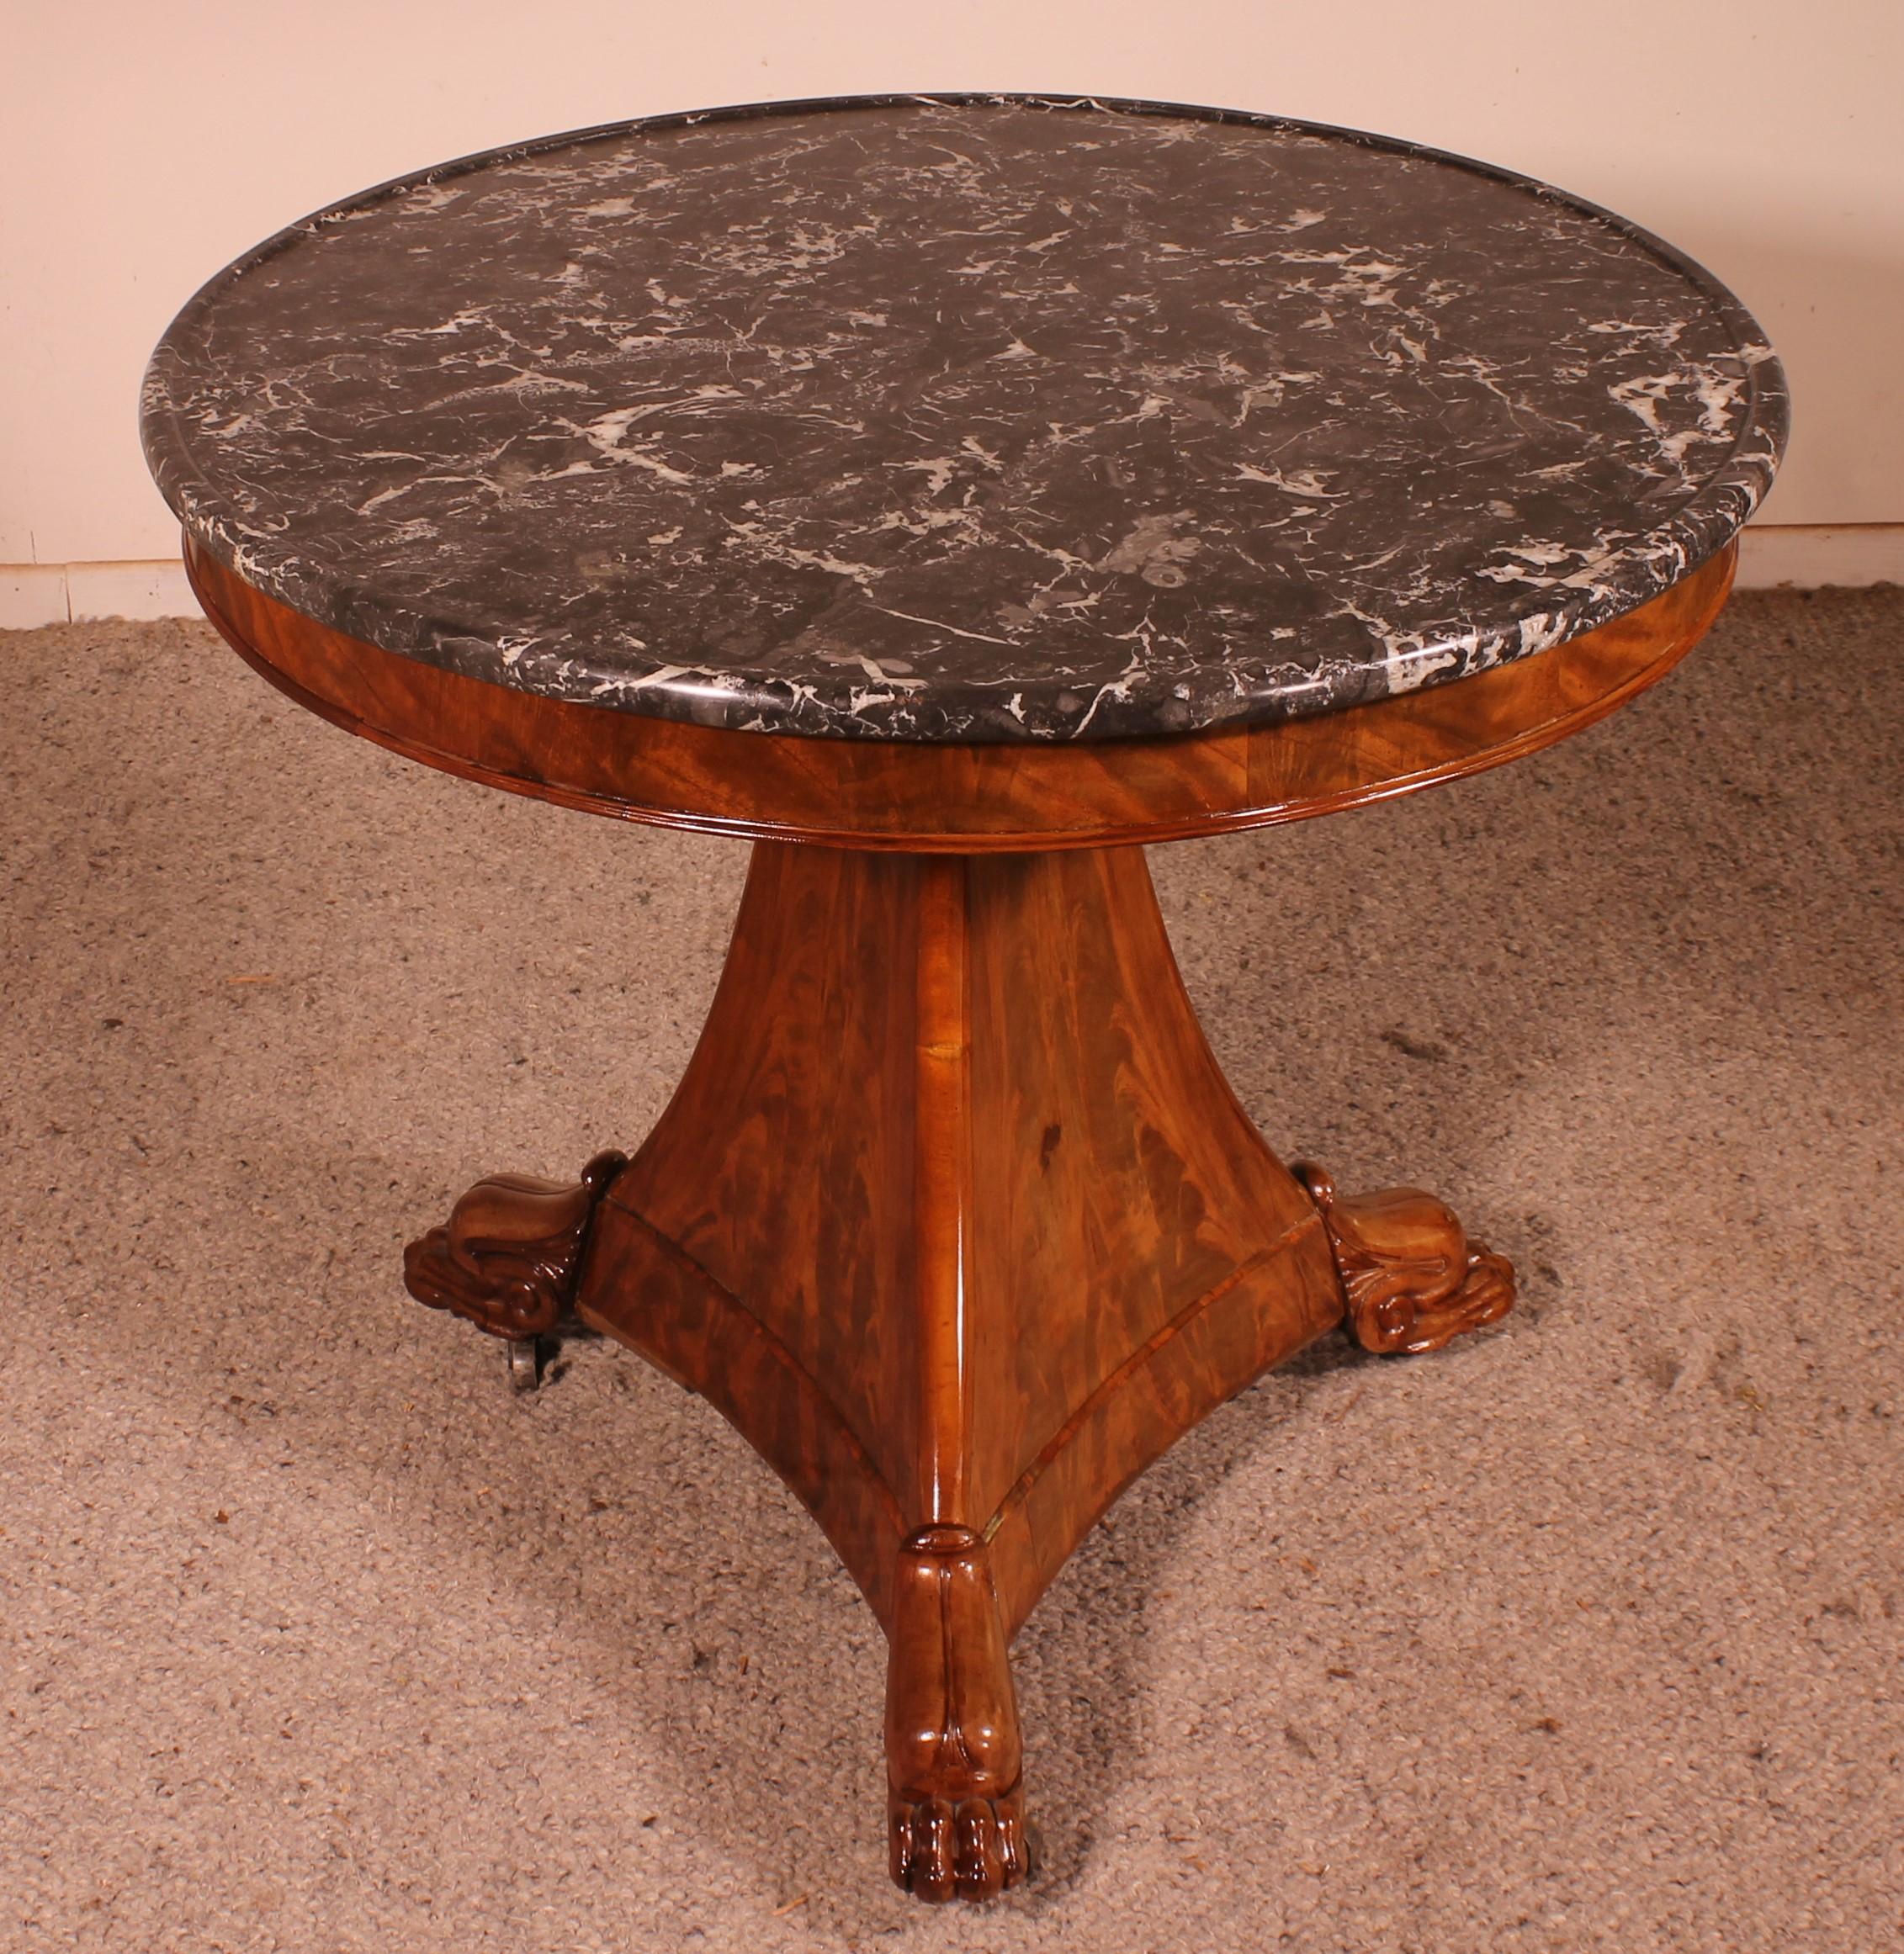 Mahogany Empire Pedestal Table with Its Saint-Anne Marble For Sale